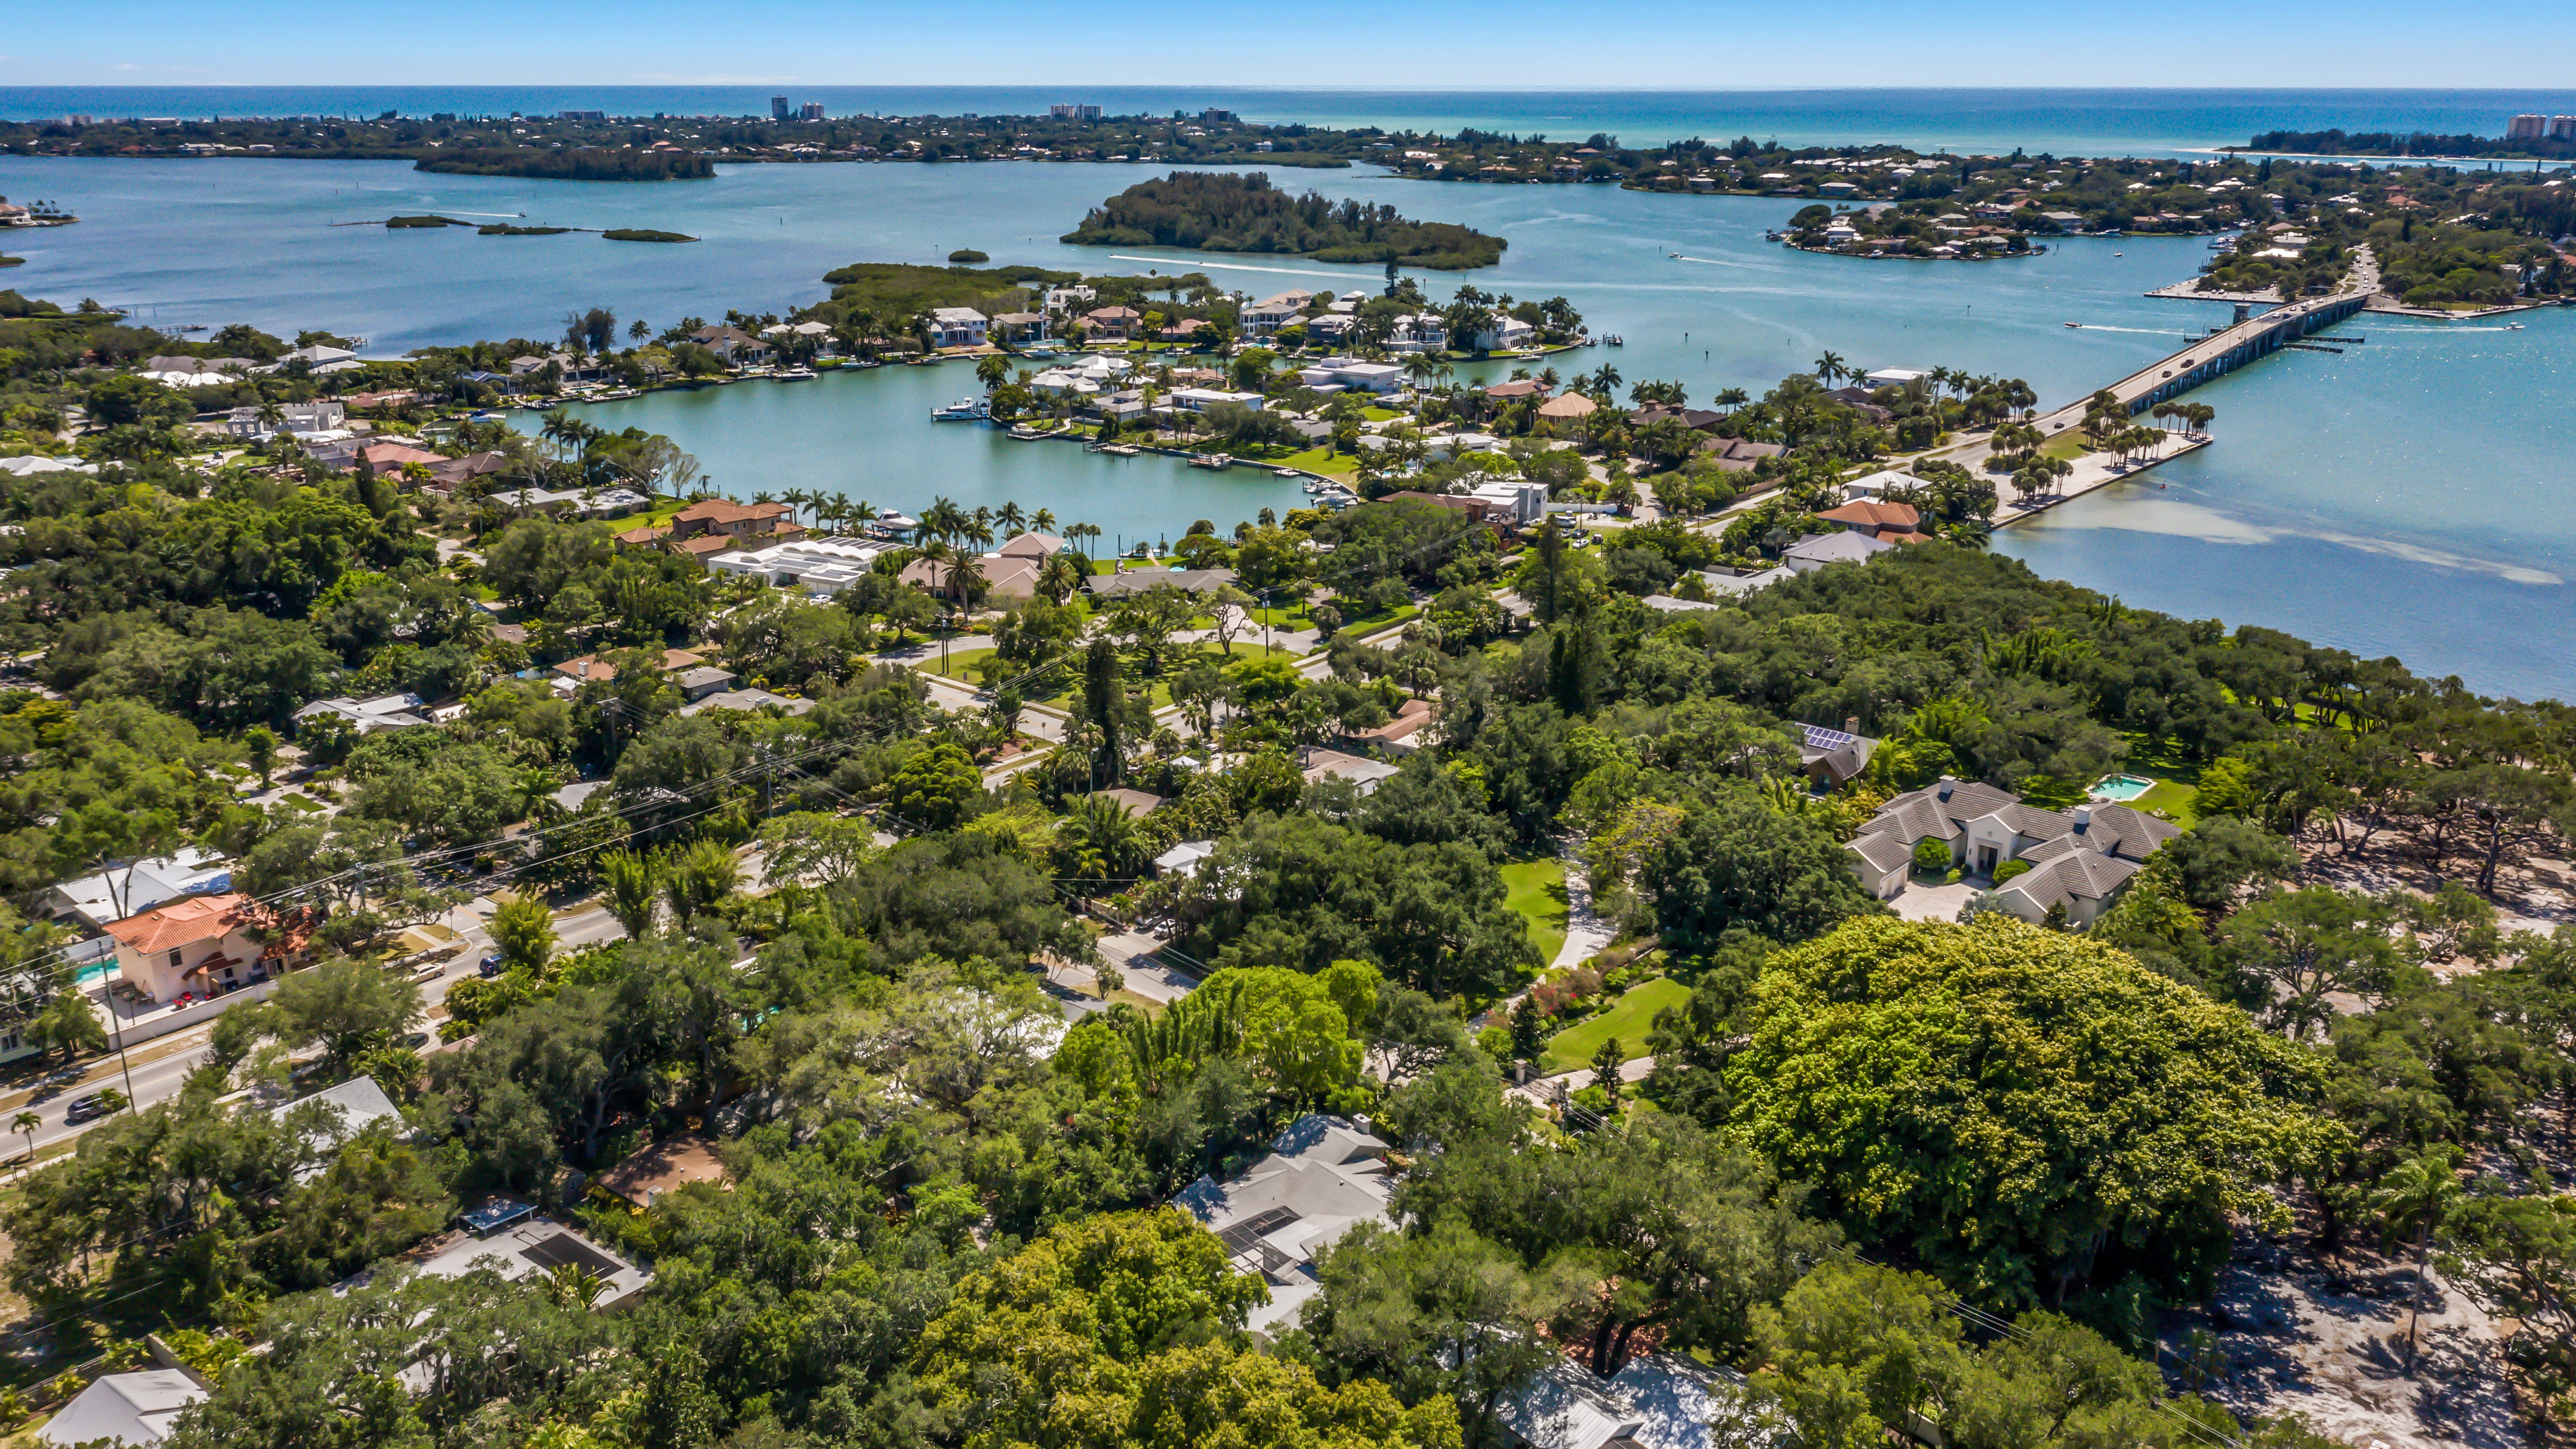 Part of the Old Oak neighborhood in Sarasota is on the bay and all the homes are near the north bridge to Siesta Key.